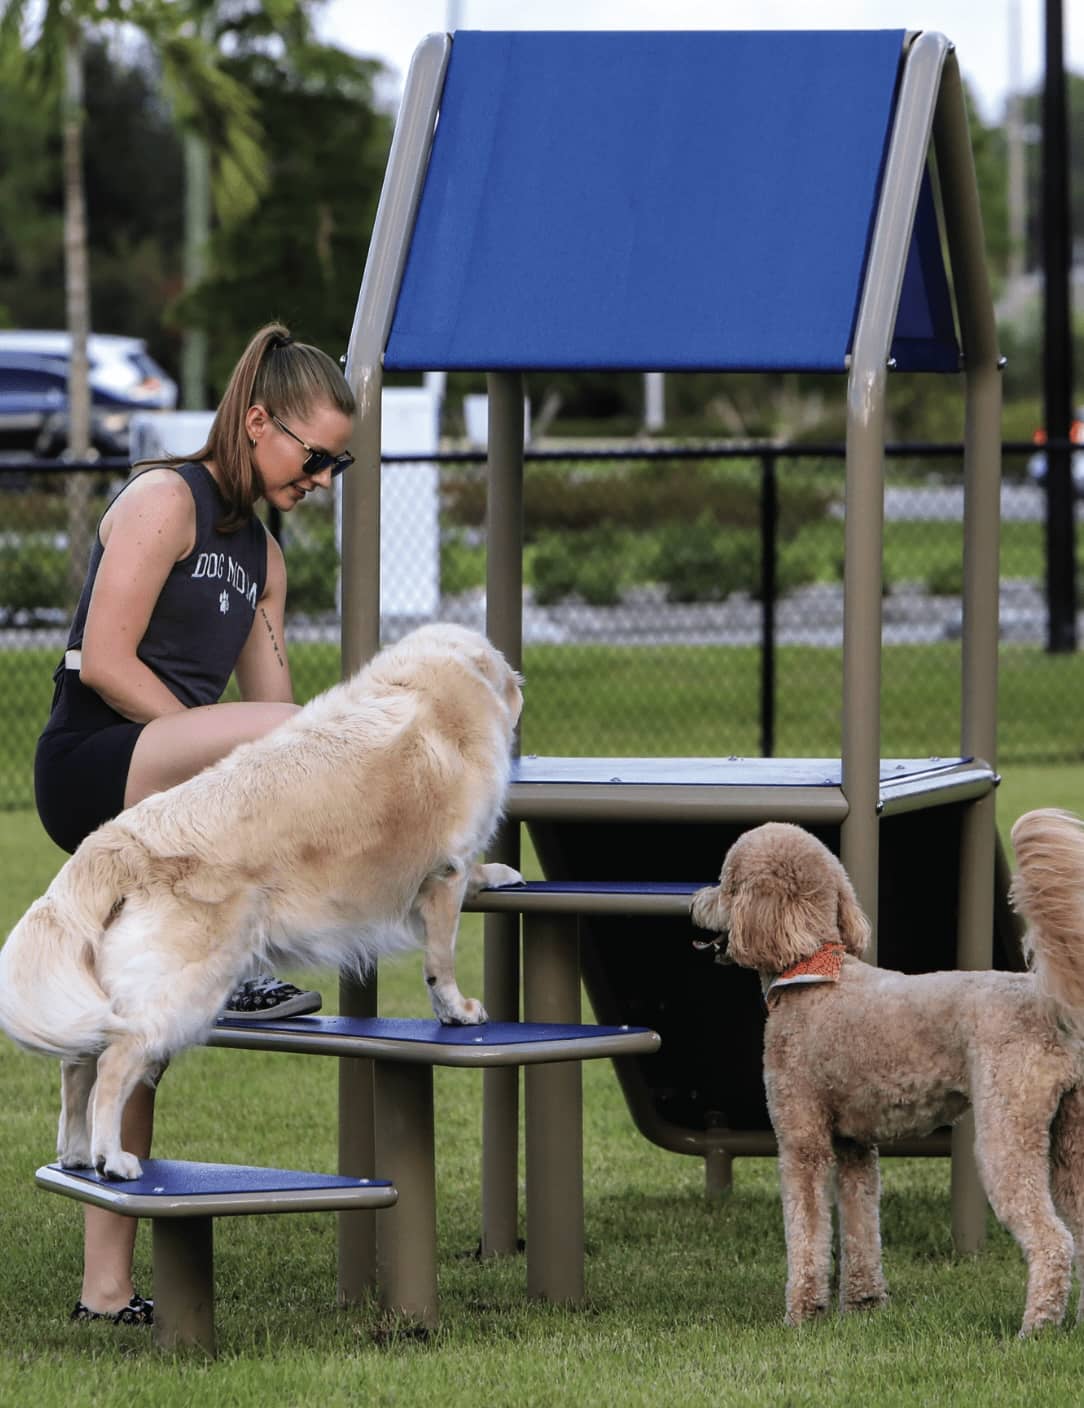 Two dogs and a resident enjoying the pet park at a community